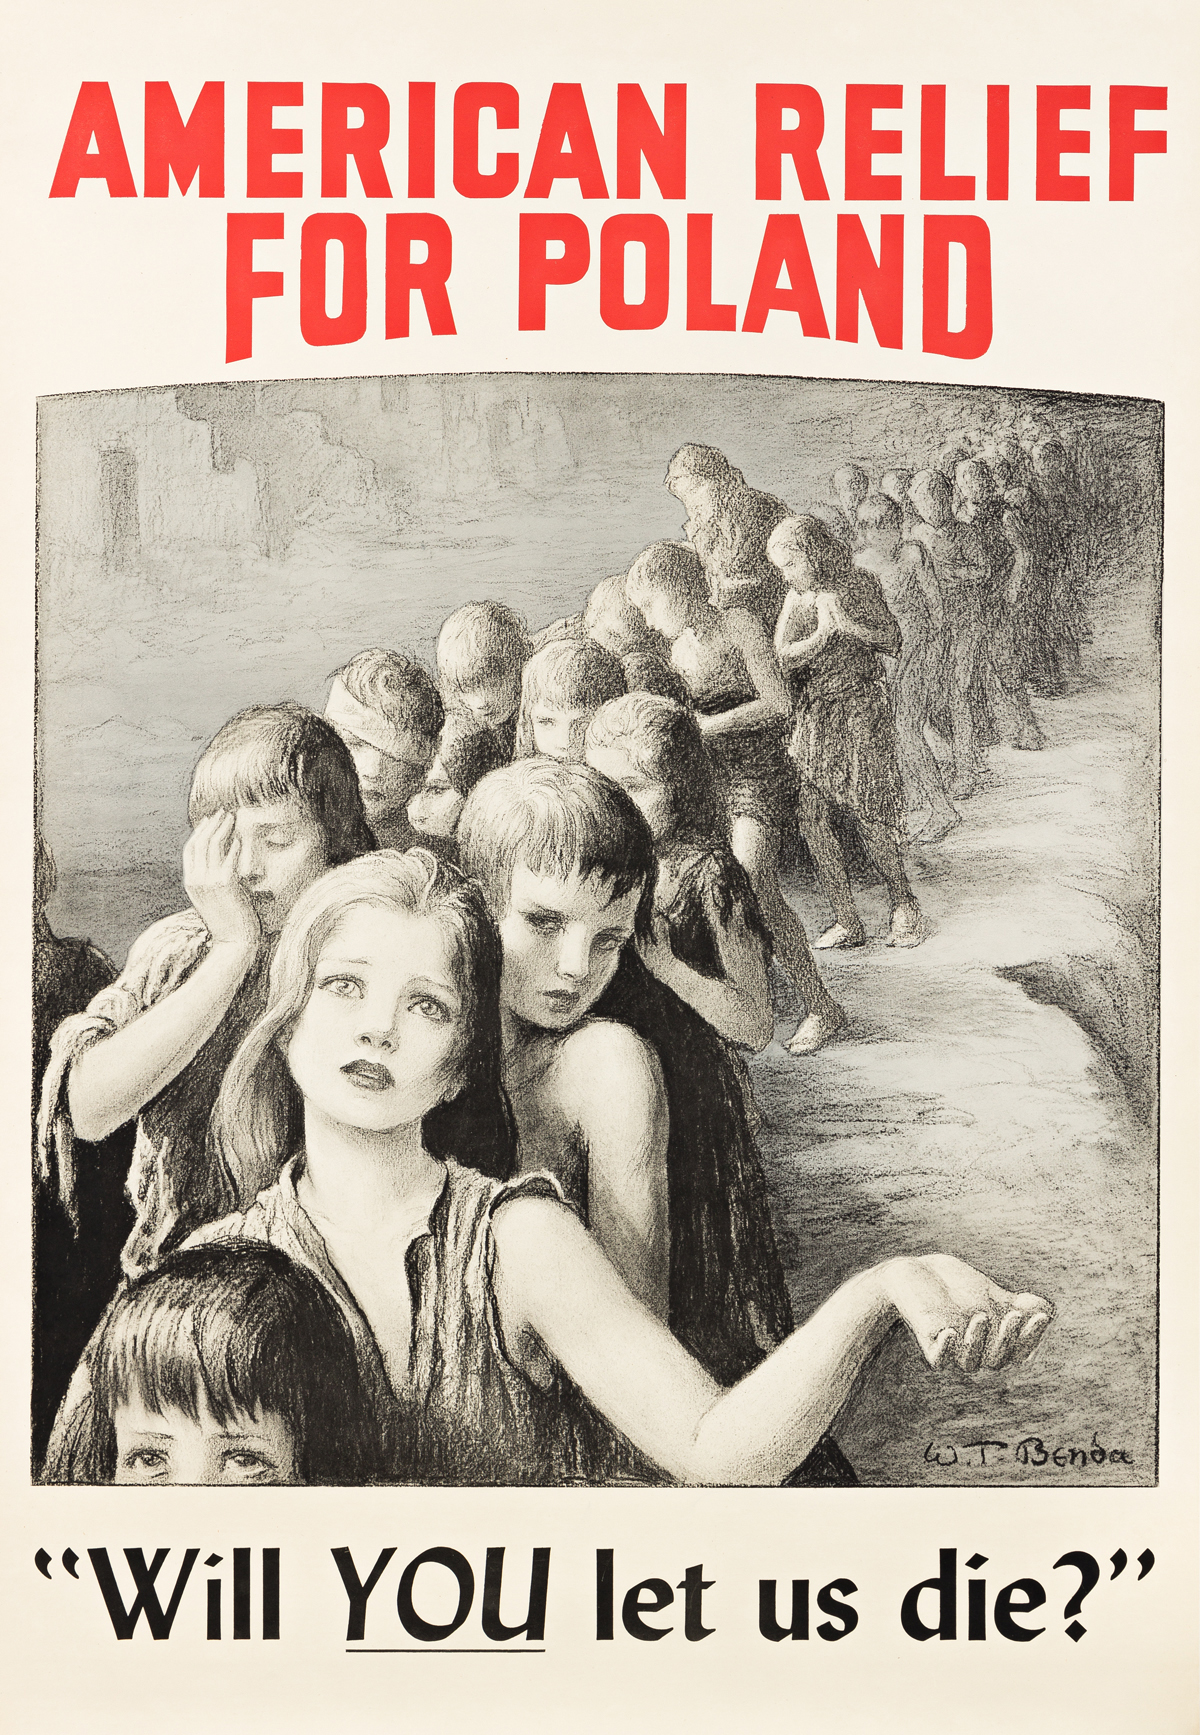 WLADYSLAW THEODOR BENDA (1873-1948).  AMERICAN RELIEF FOR POLAND / WILL YOU LET US DIE? 43¼x29¾ inches, 110x75½ cm.